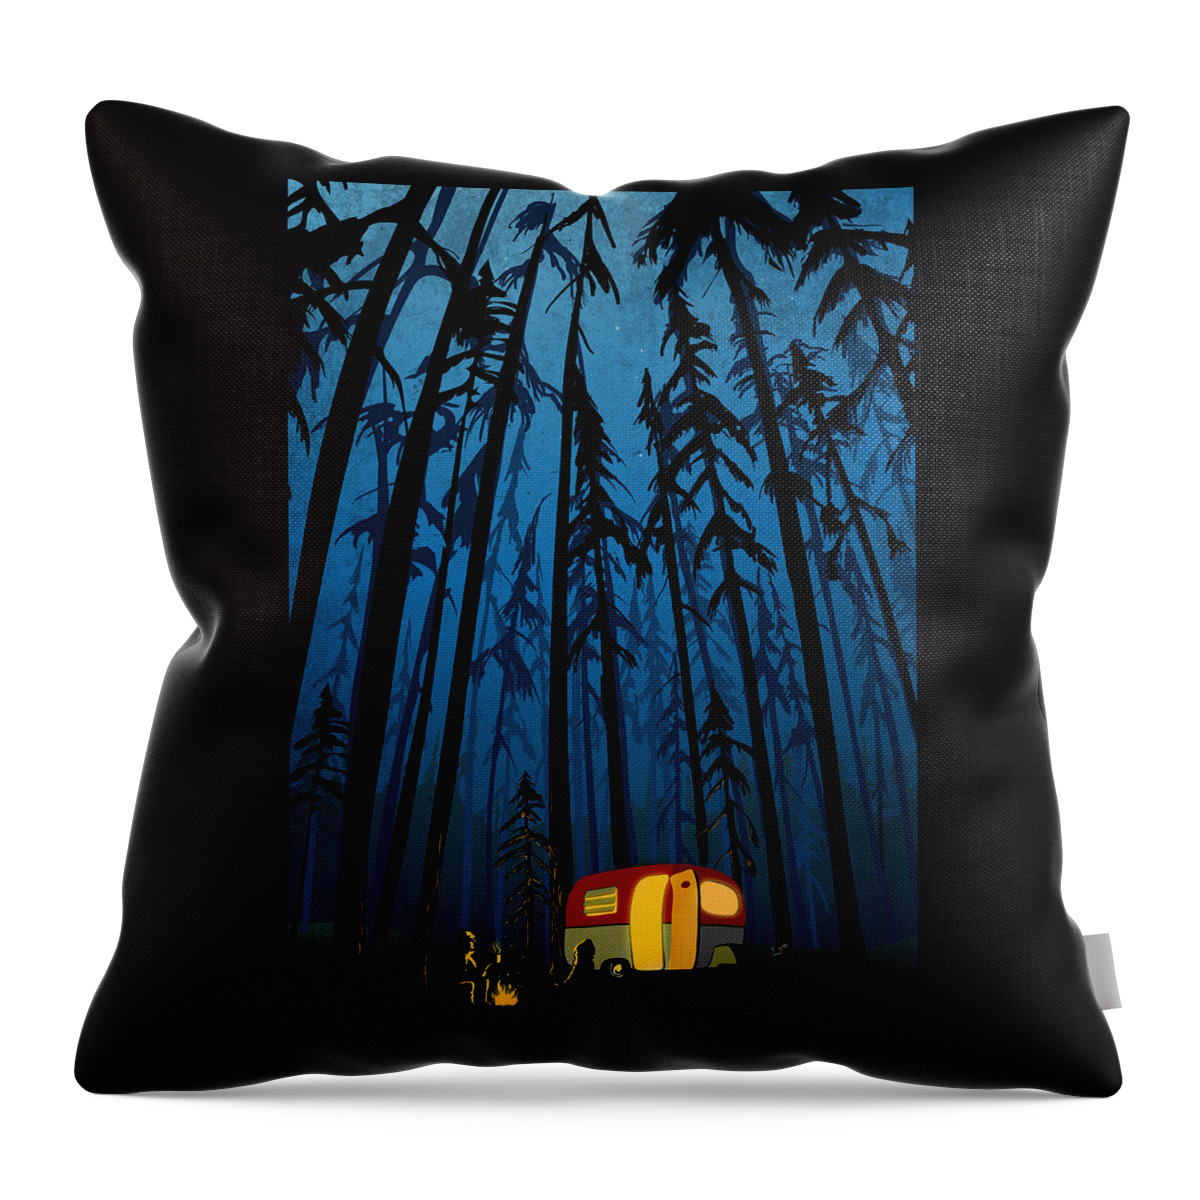 Camper In The Woods Throw Pillow featuring the painting Twilight Camping by Sassan Filsoof